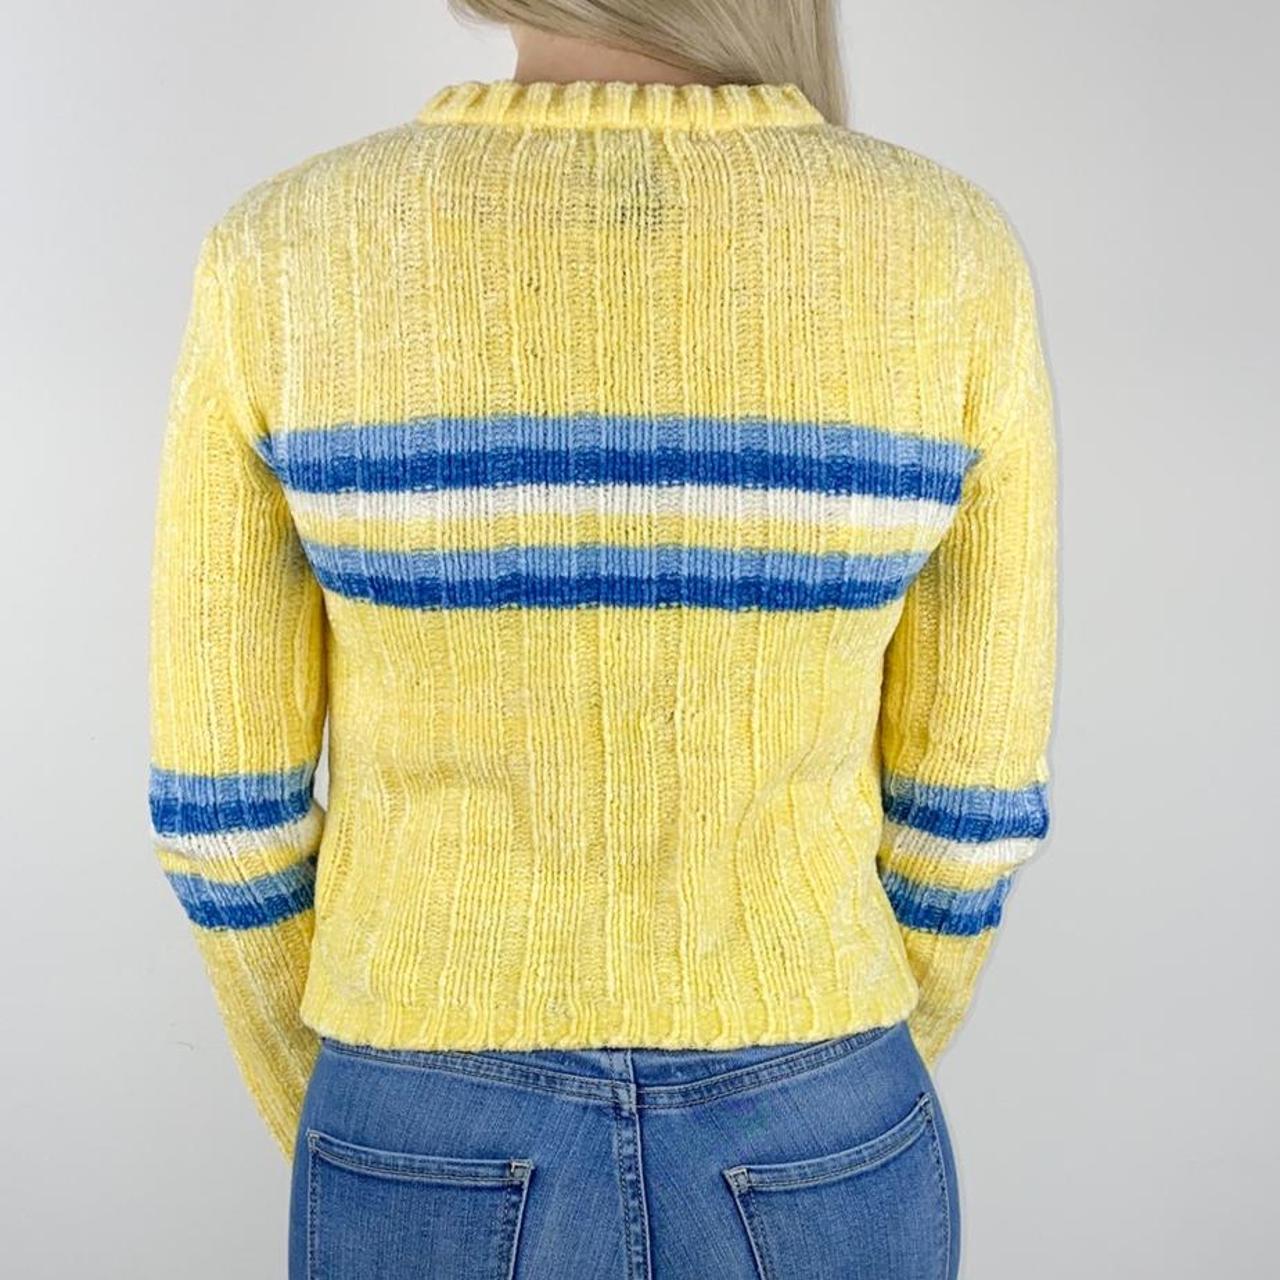 2000s Bright Yellow Striped Sweater 💙 size :... - Depop